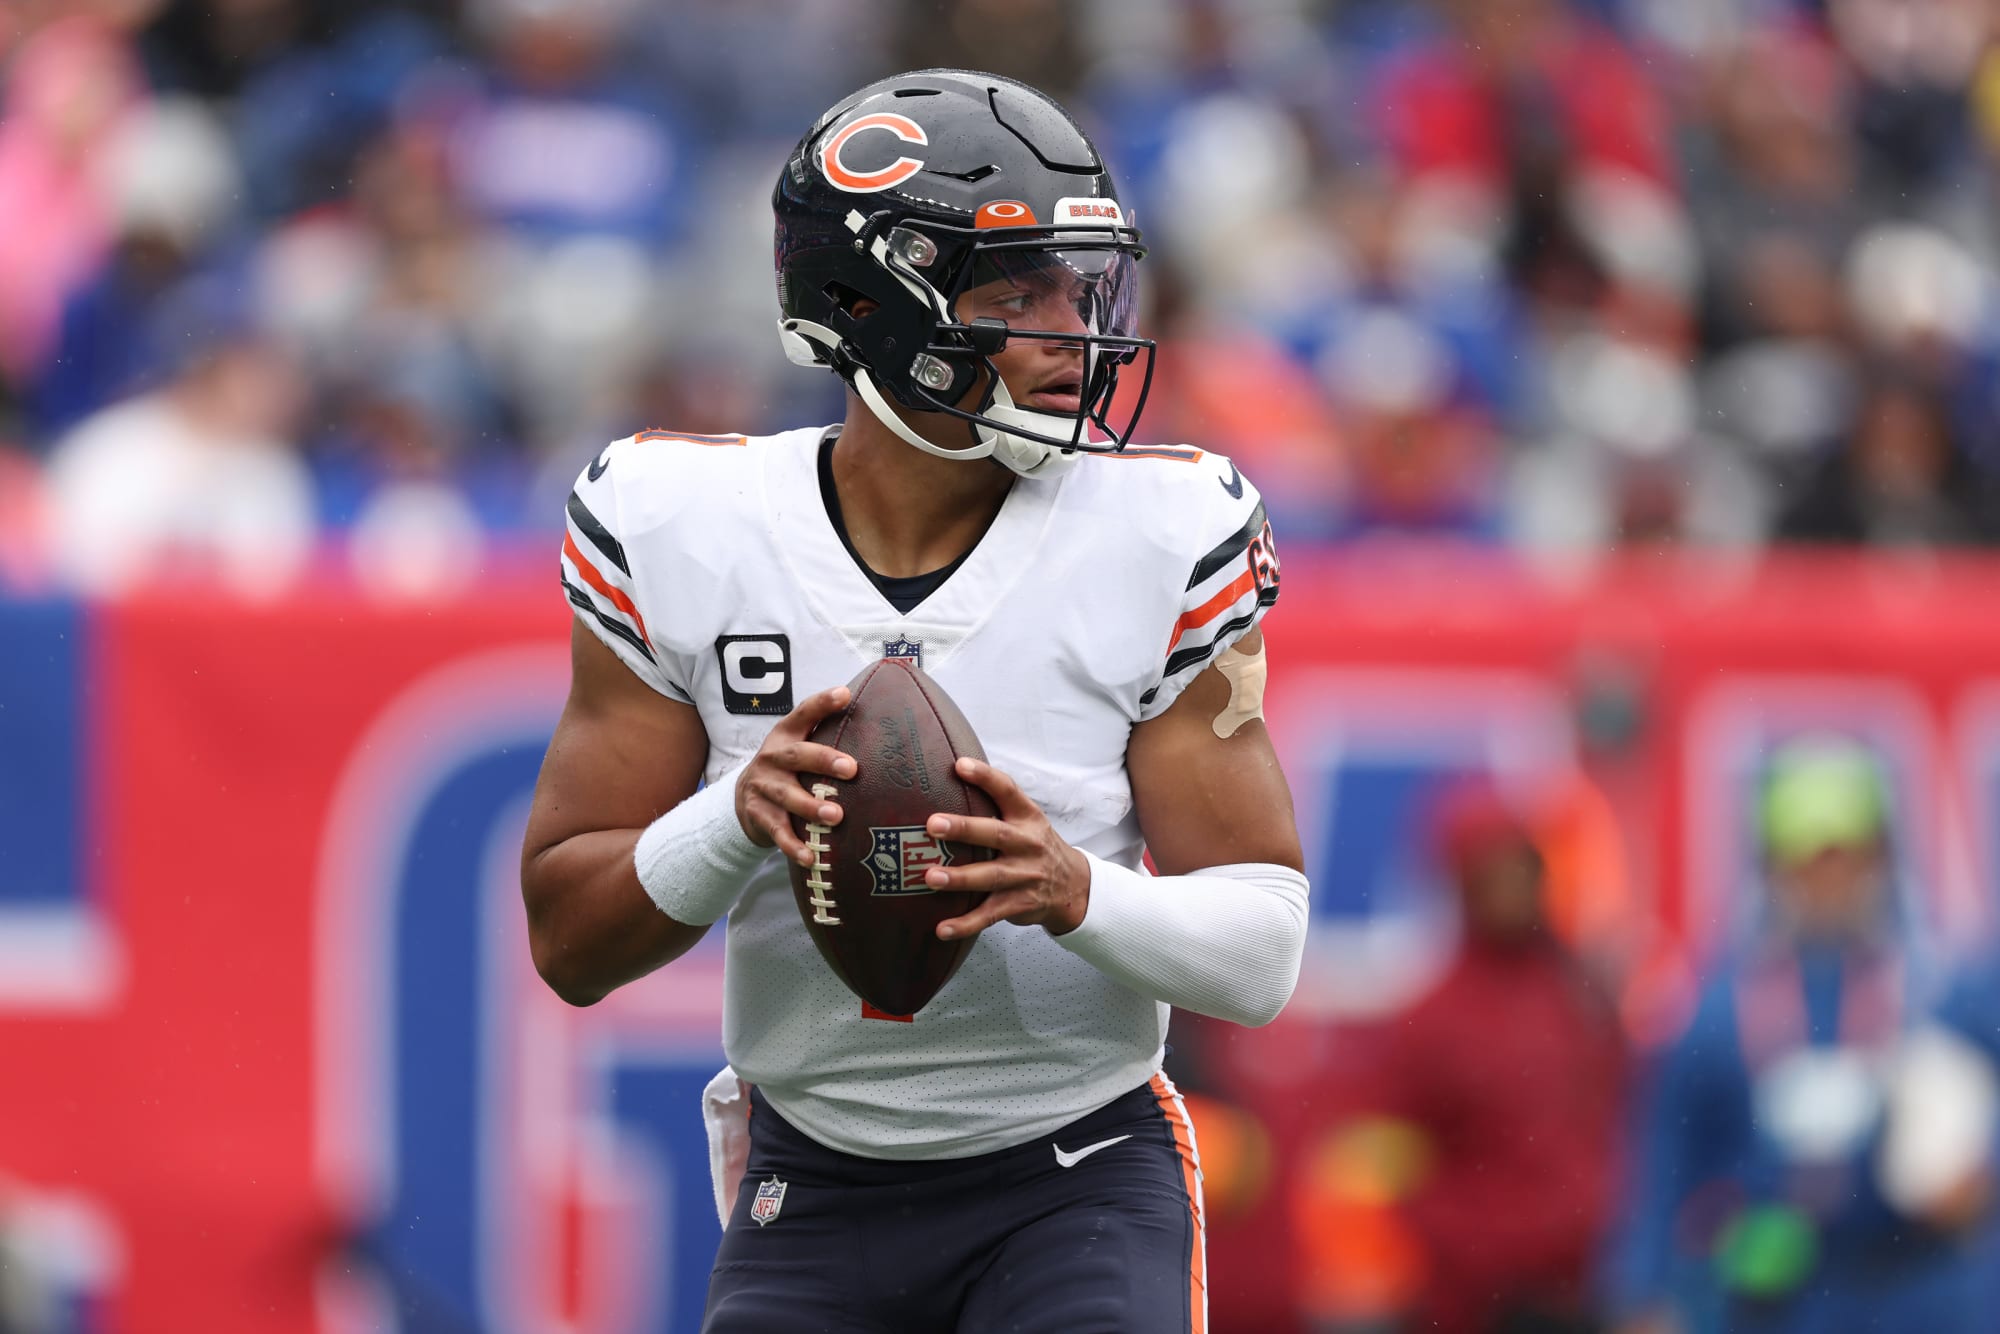 Does Justin Fields have the toughest job in the NFL?